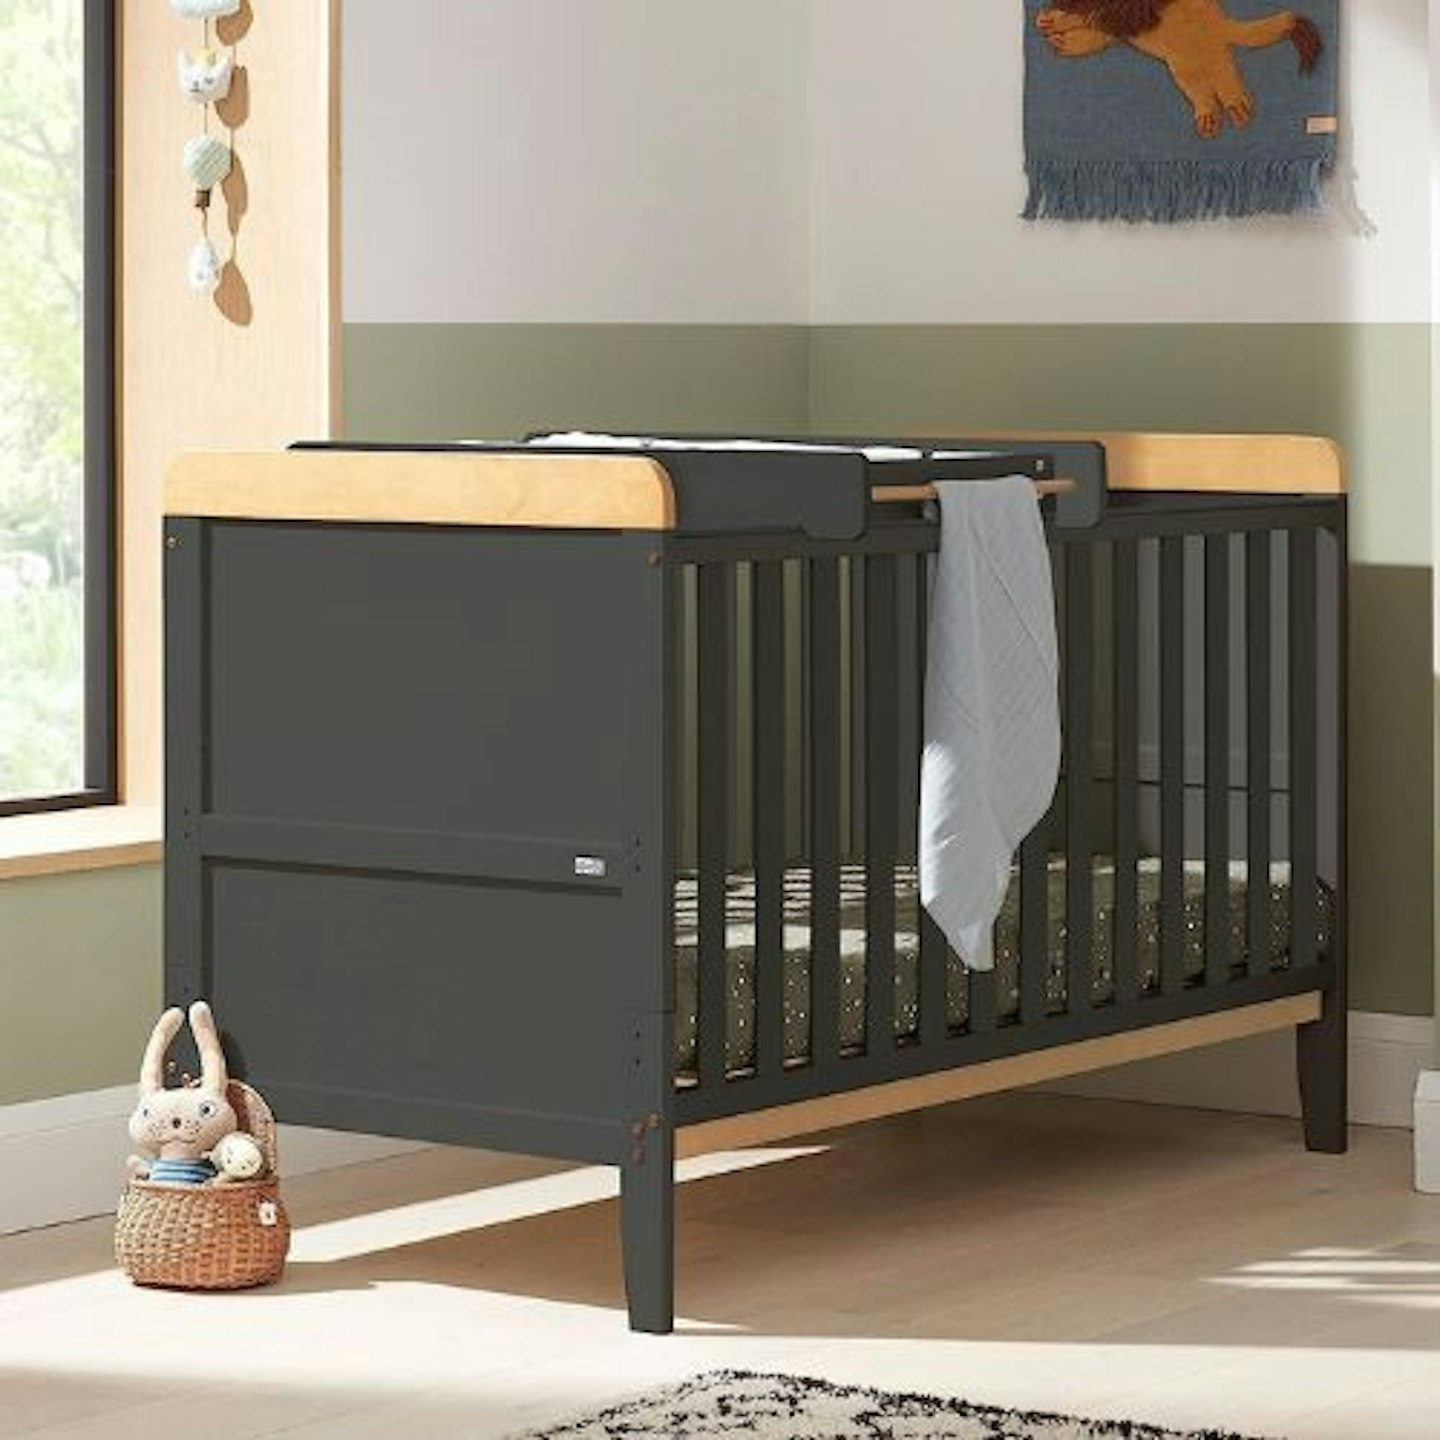 Best Cot Beds and Cots : Tutti Bambini Rio Wooden Cot Bed 